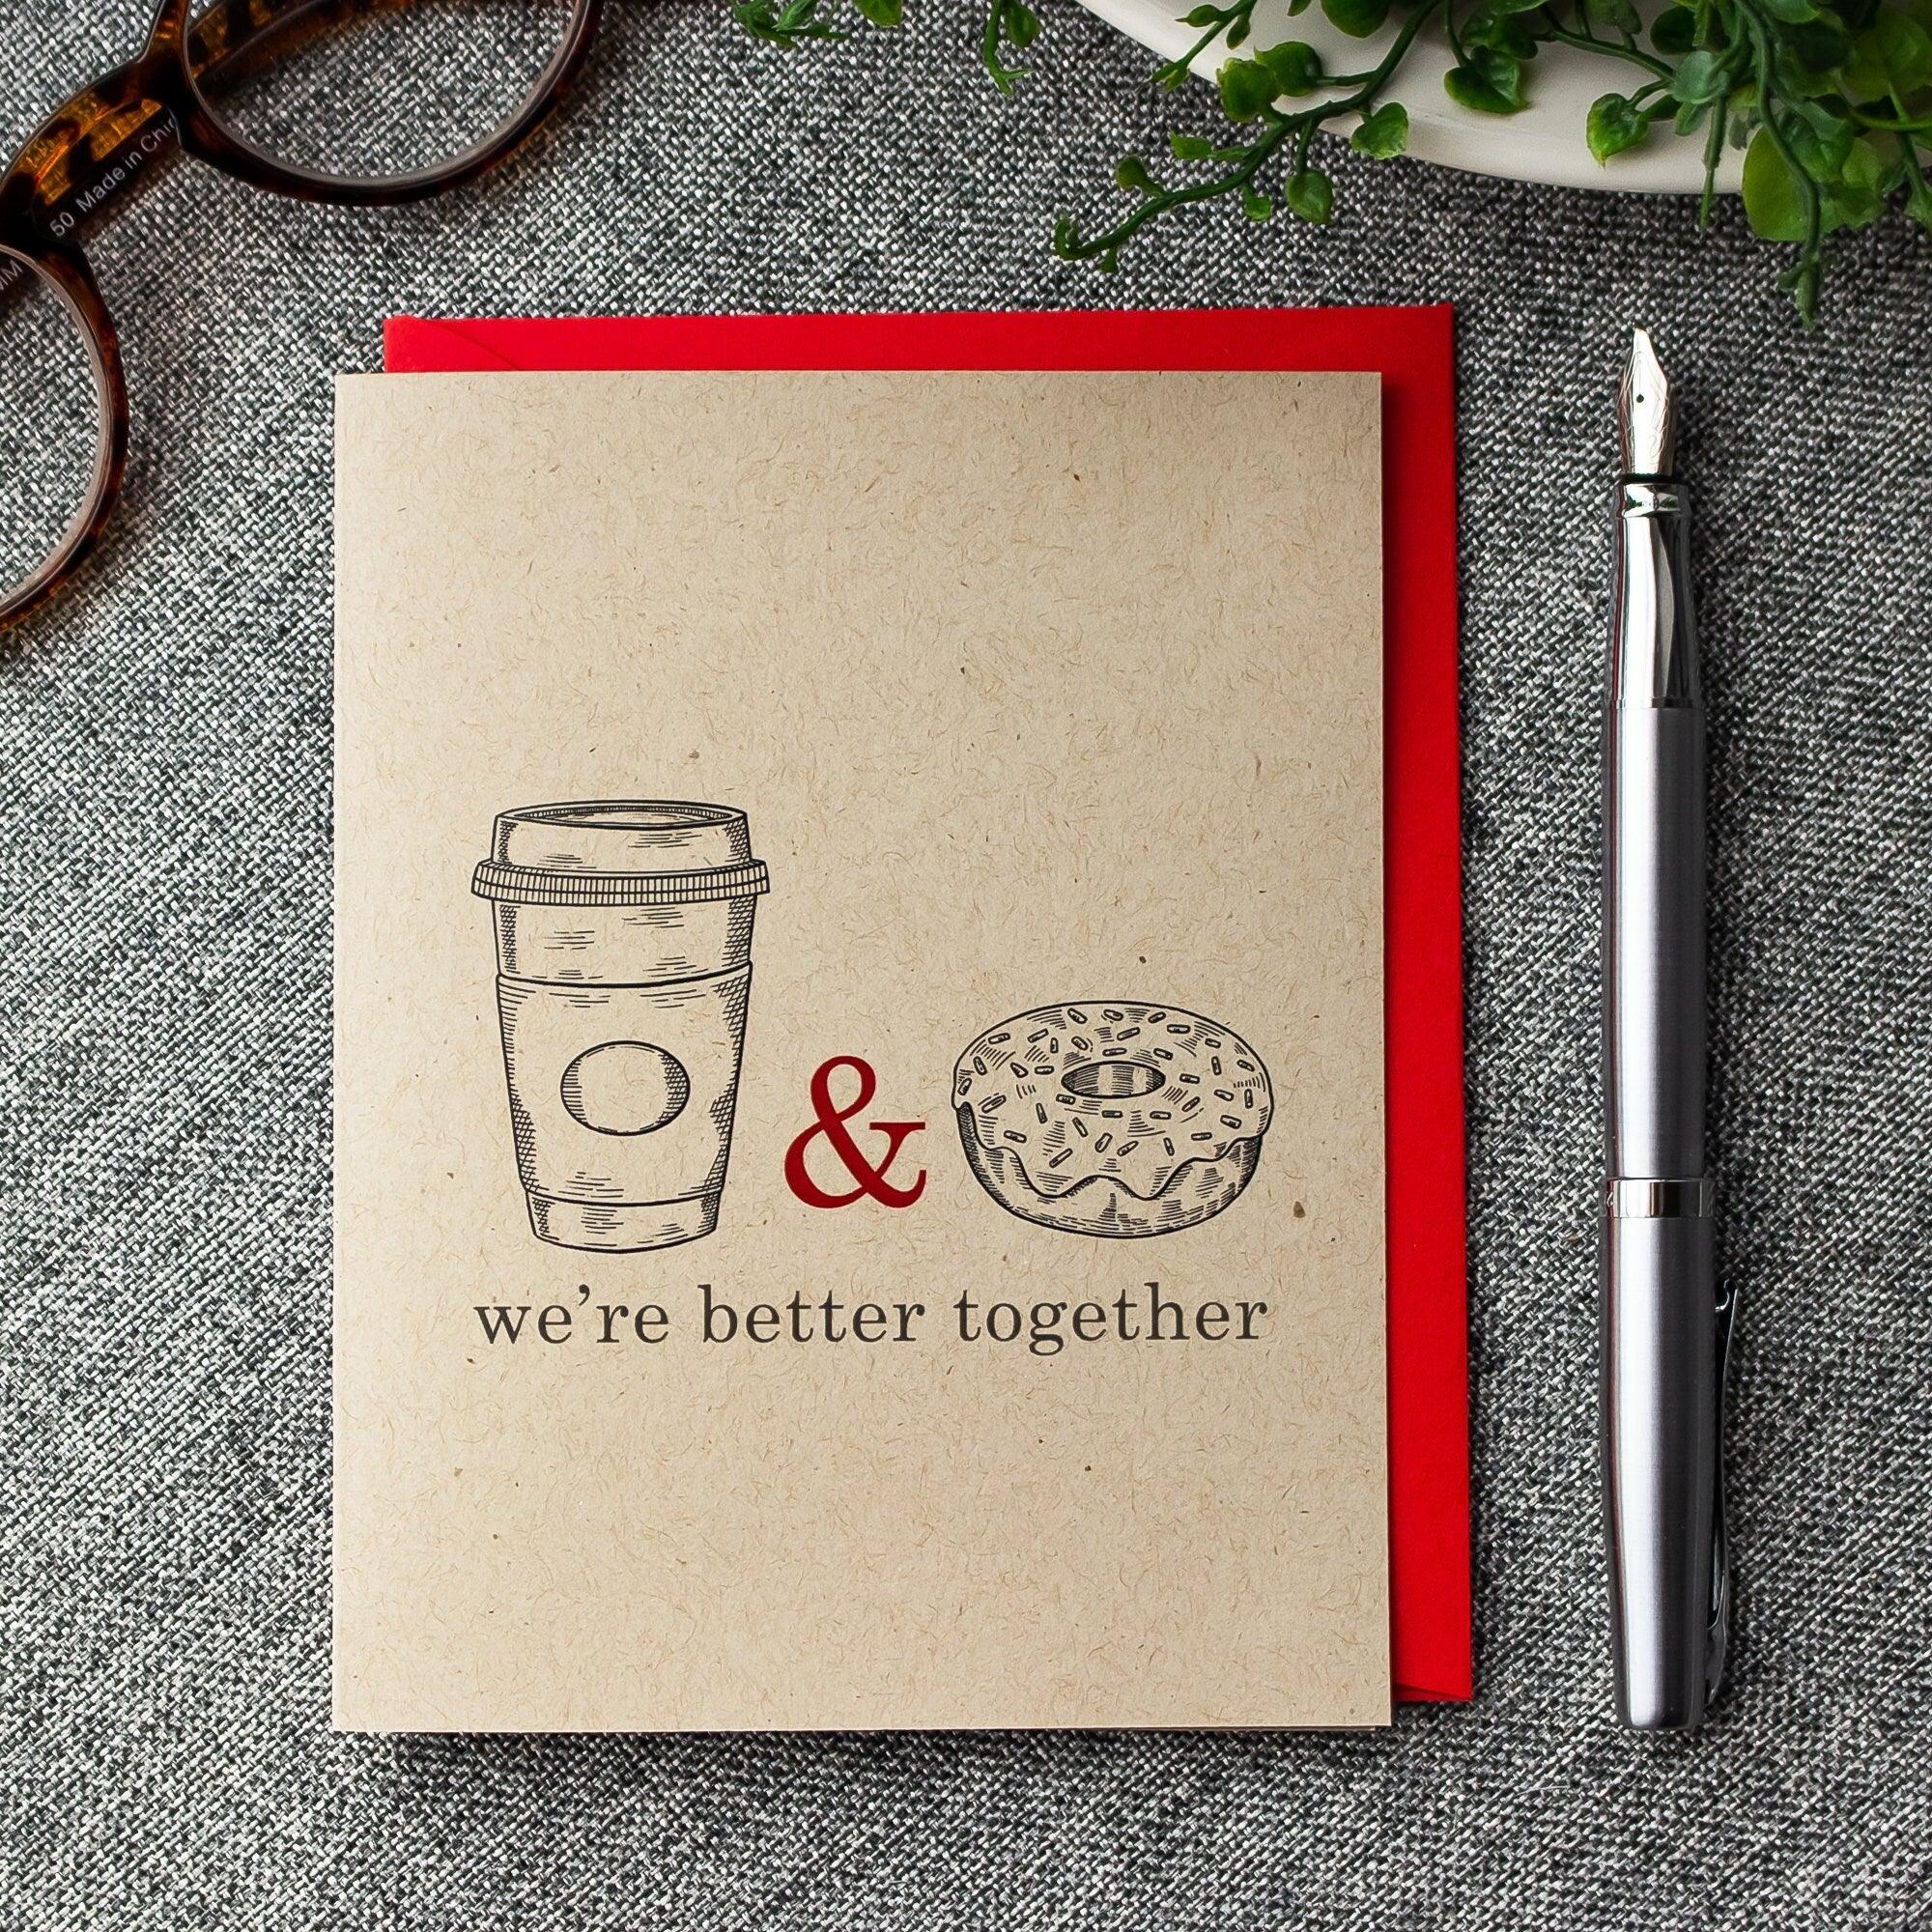 Funny Valentine's Day Card - Coffee and Doughnut - We're Better Together Love Card for Partner - Gender Neutral Valentine